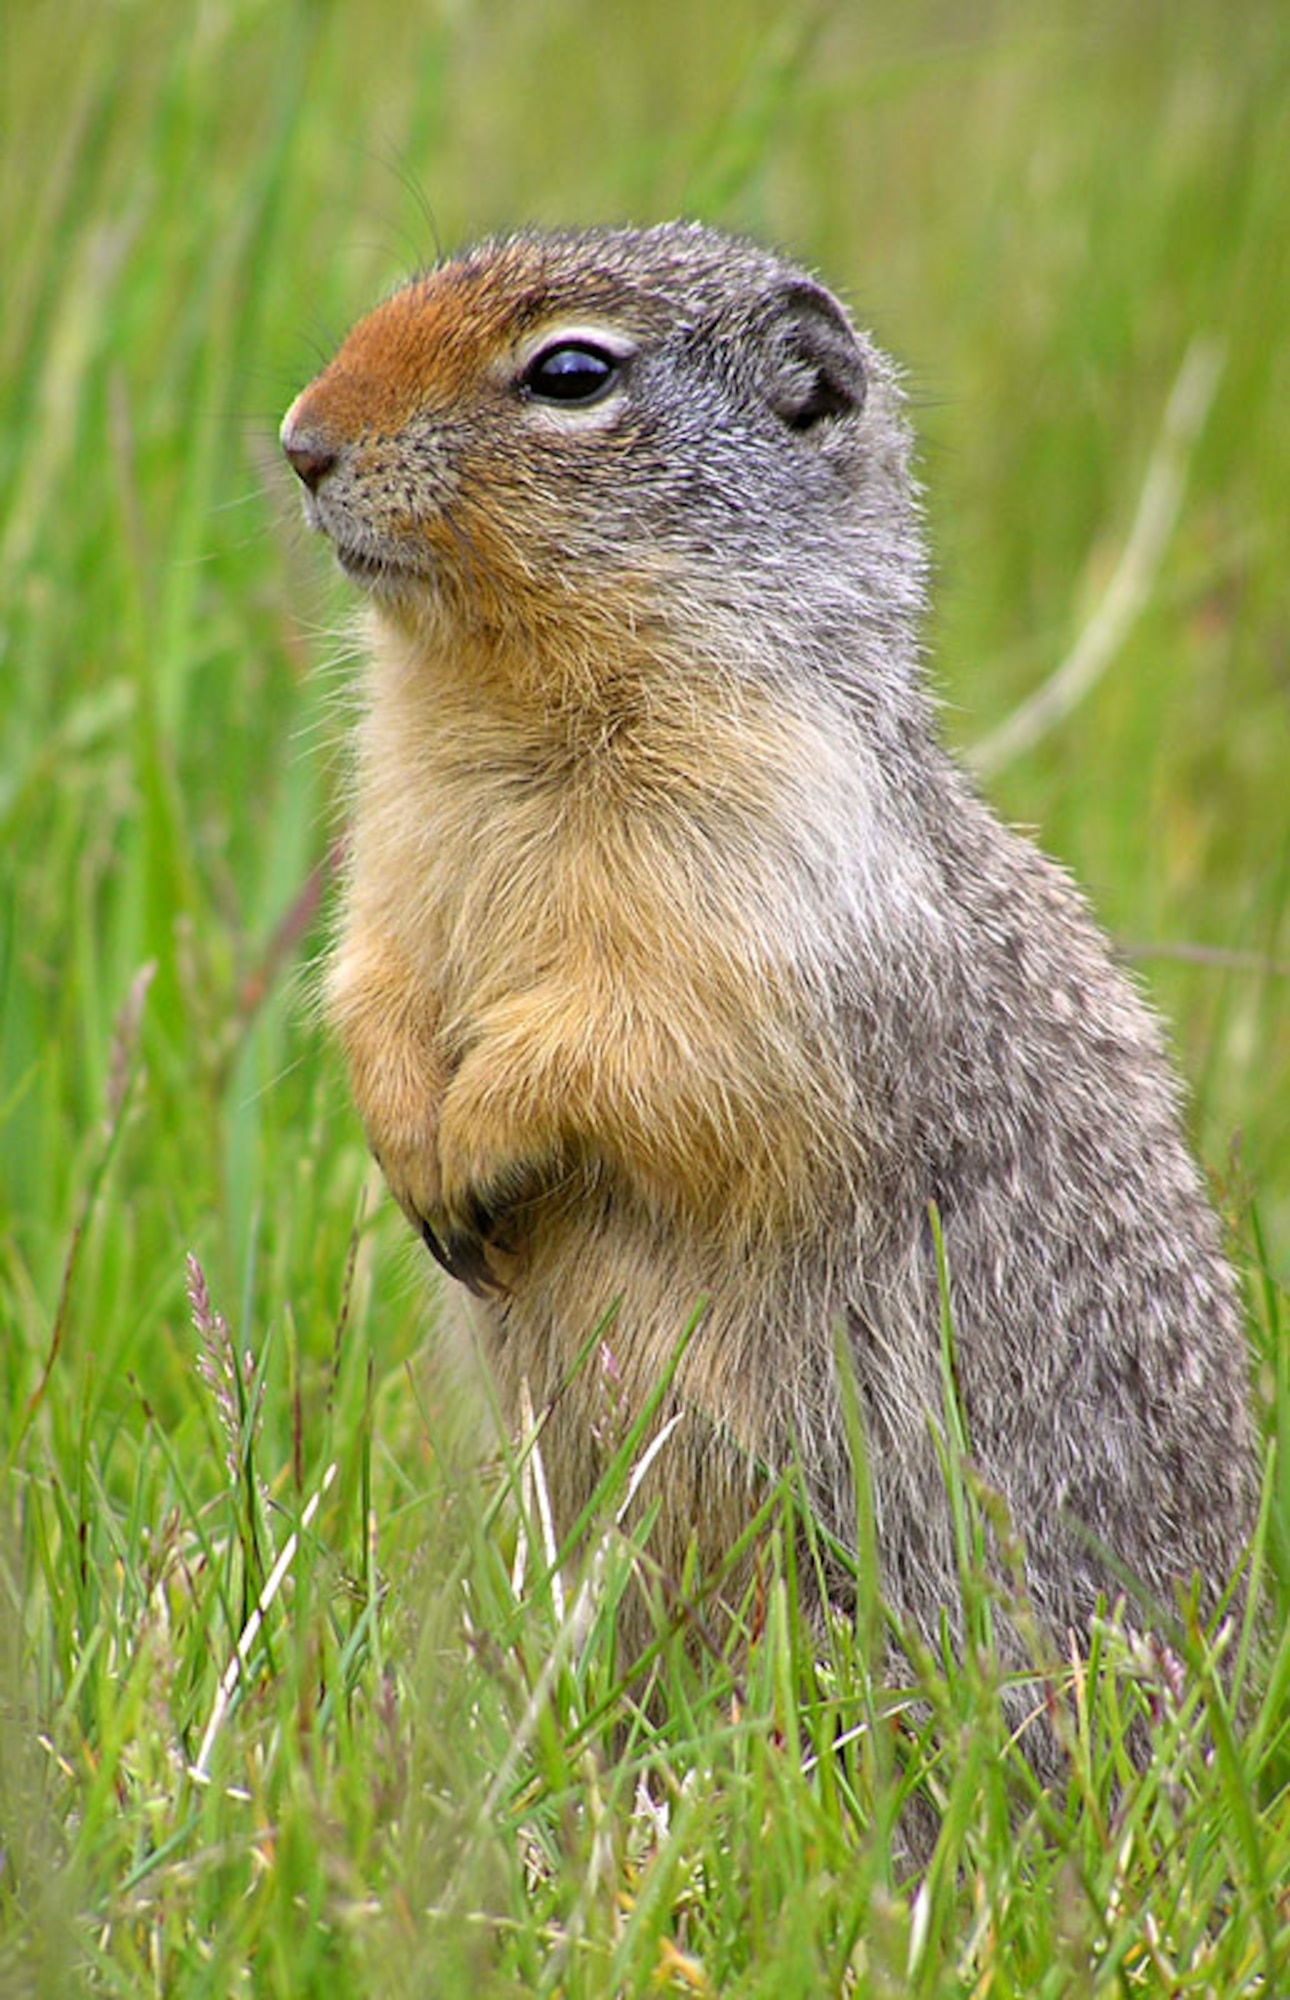 MINOT AIR FORCE BASE, N.D. -- Richardson’s ground squirrels, or Dakrats, are a common sight across all of Minot AFB. (Courtesy photo)